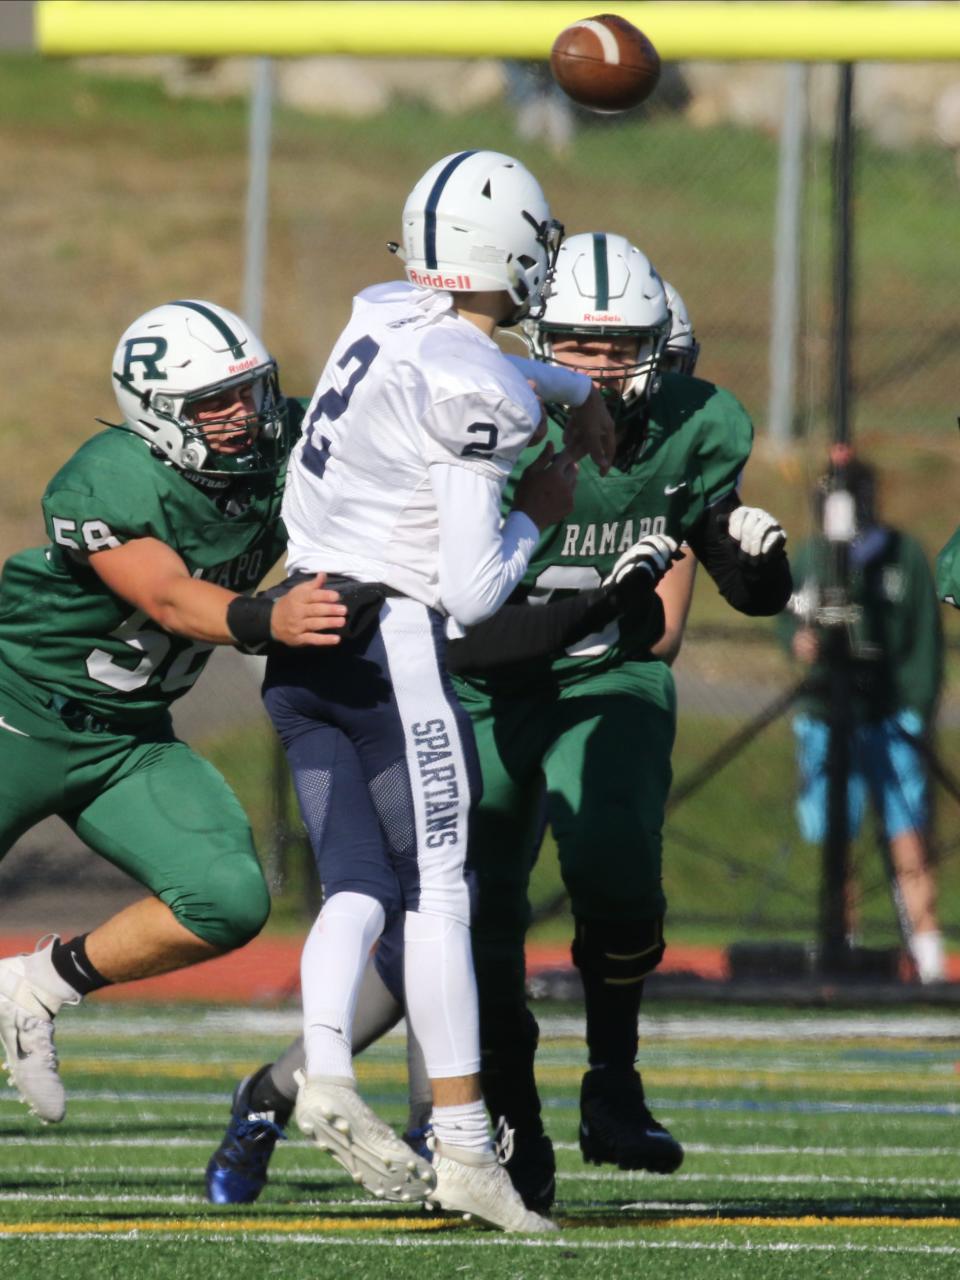 Senior Corey Petruzzella of Paramus gets rid of the ball before being tackled in a game against Ramapo in 2020.